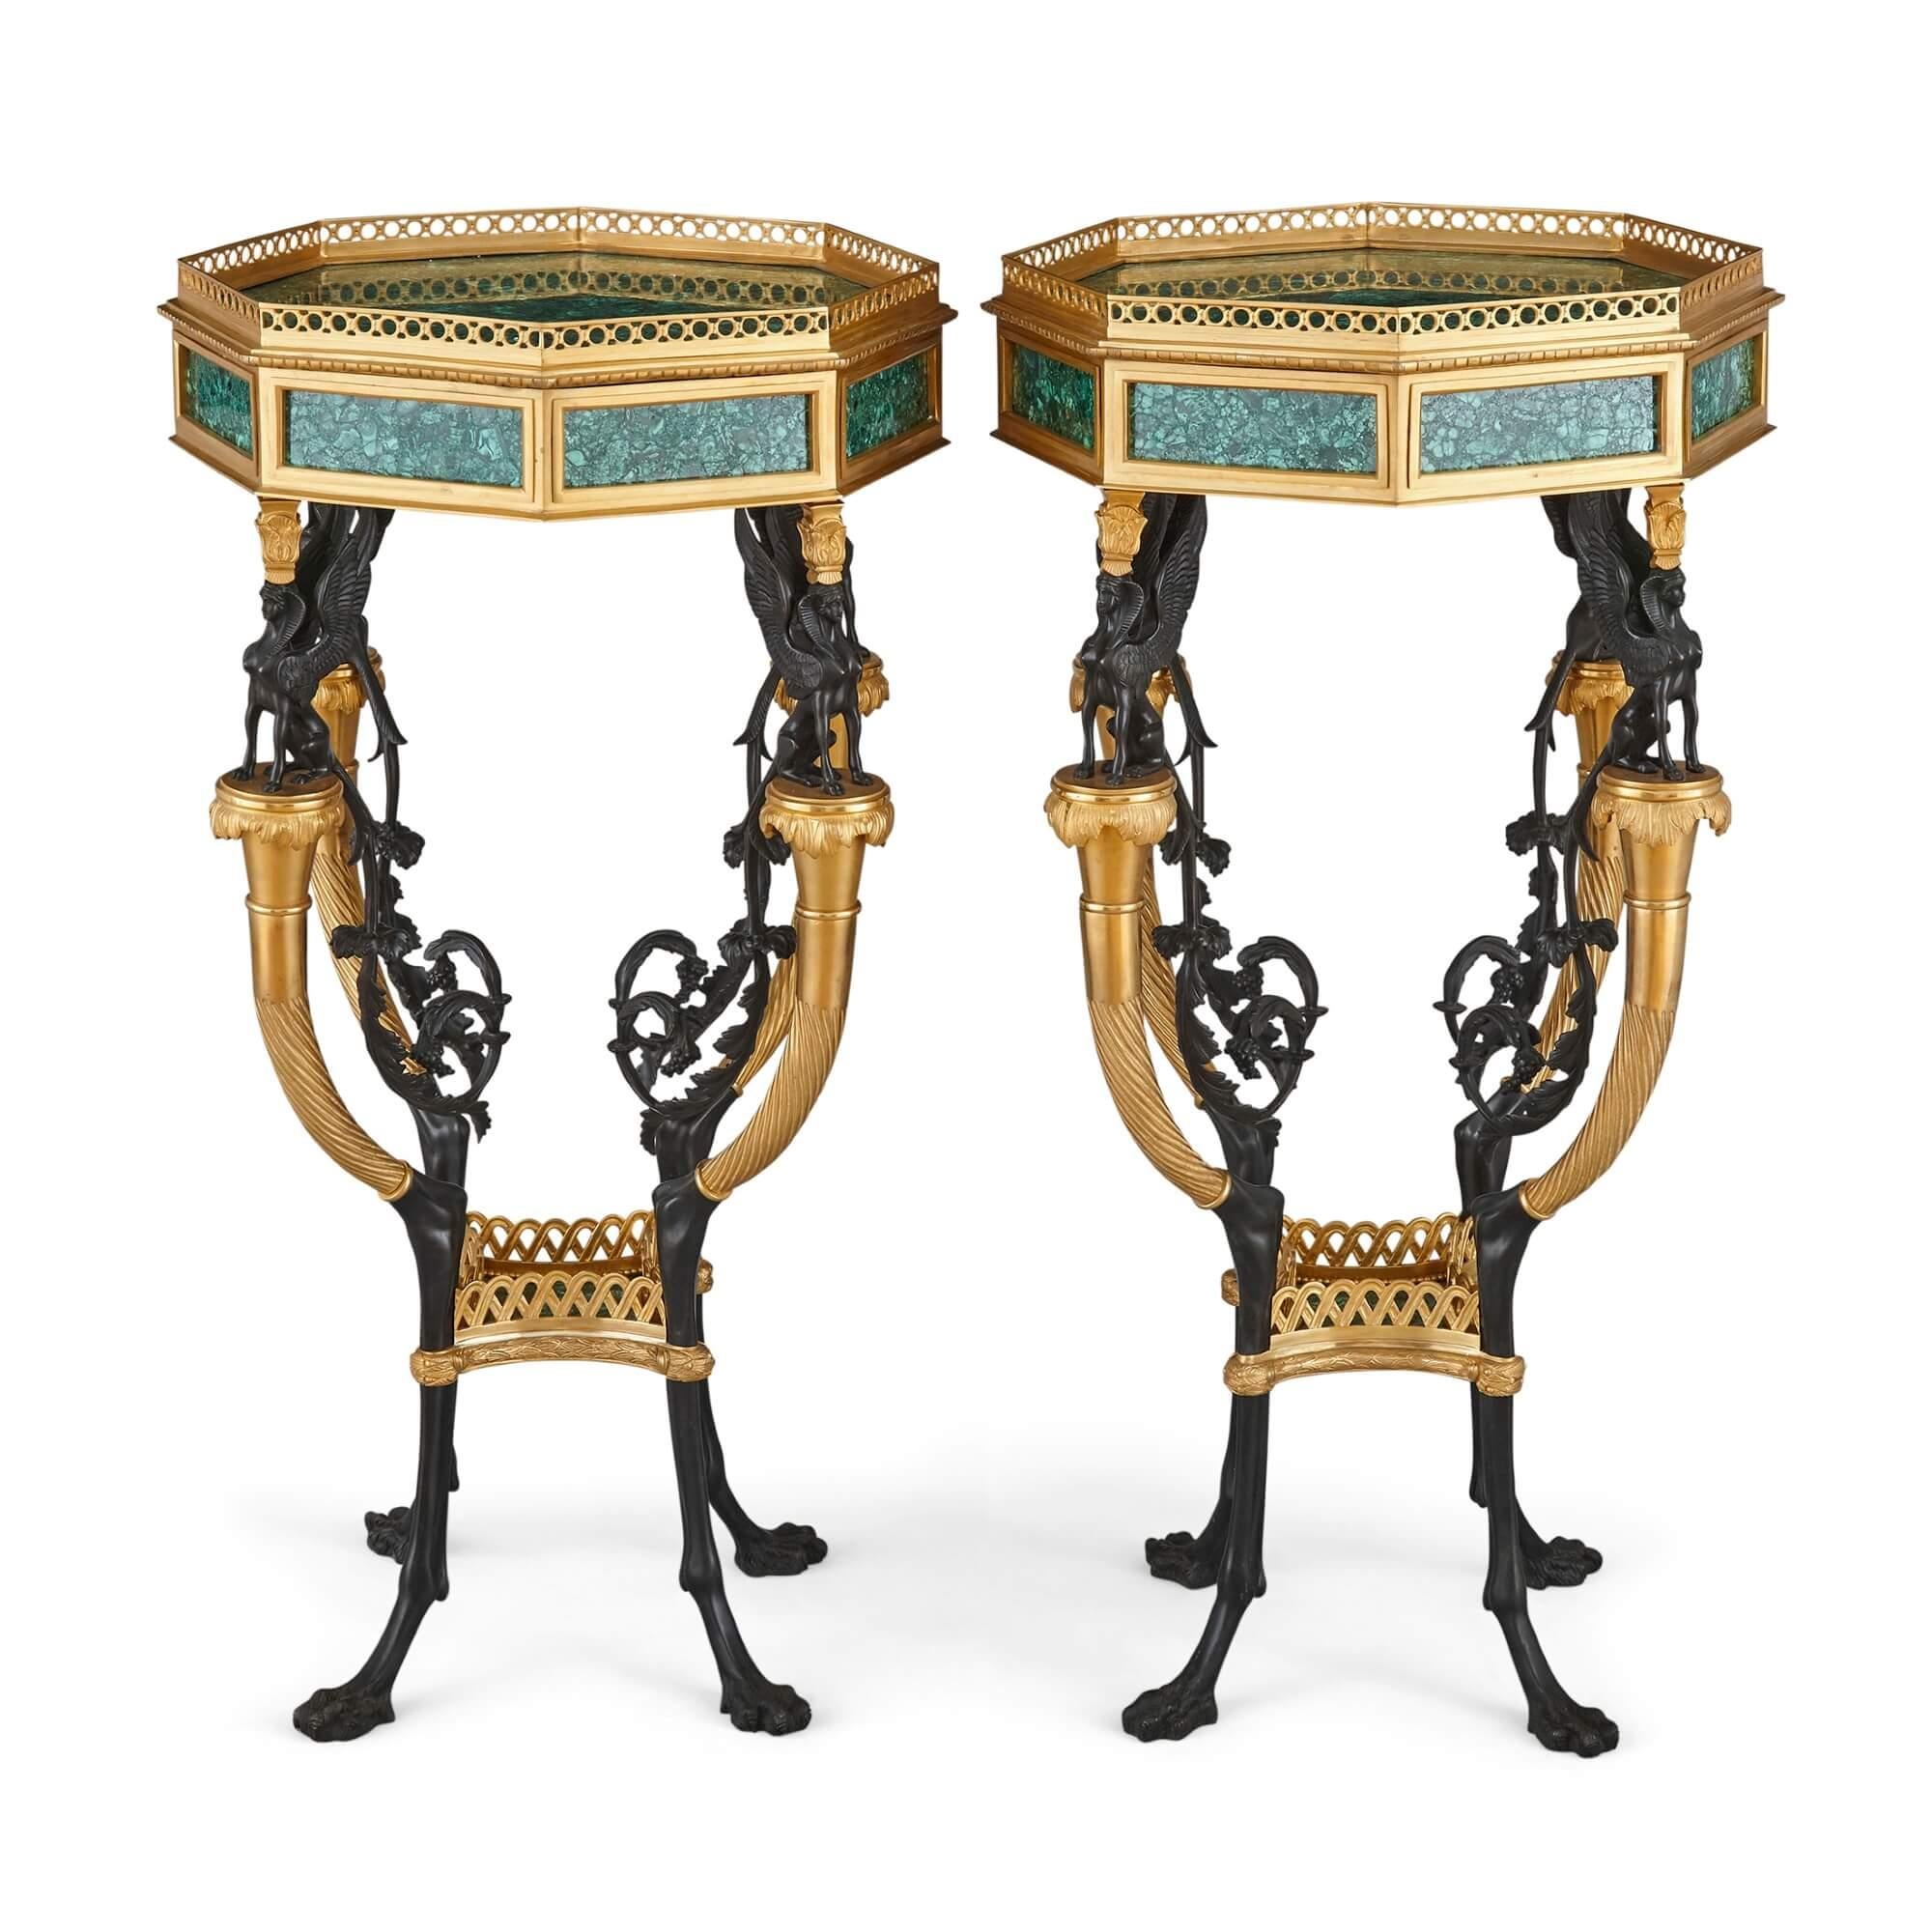 Pair of French neoclassical style malachite and gilt bronze side tables
French, 20th century
Dimensions: Height 85cm, diameter 50cm

These striking octagonal guéridons are crafted from malachite, ormolu, and patinated bronze. Designed in the